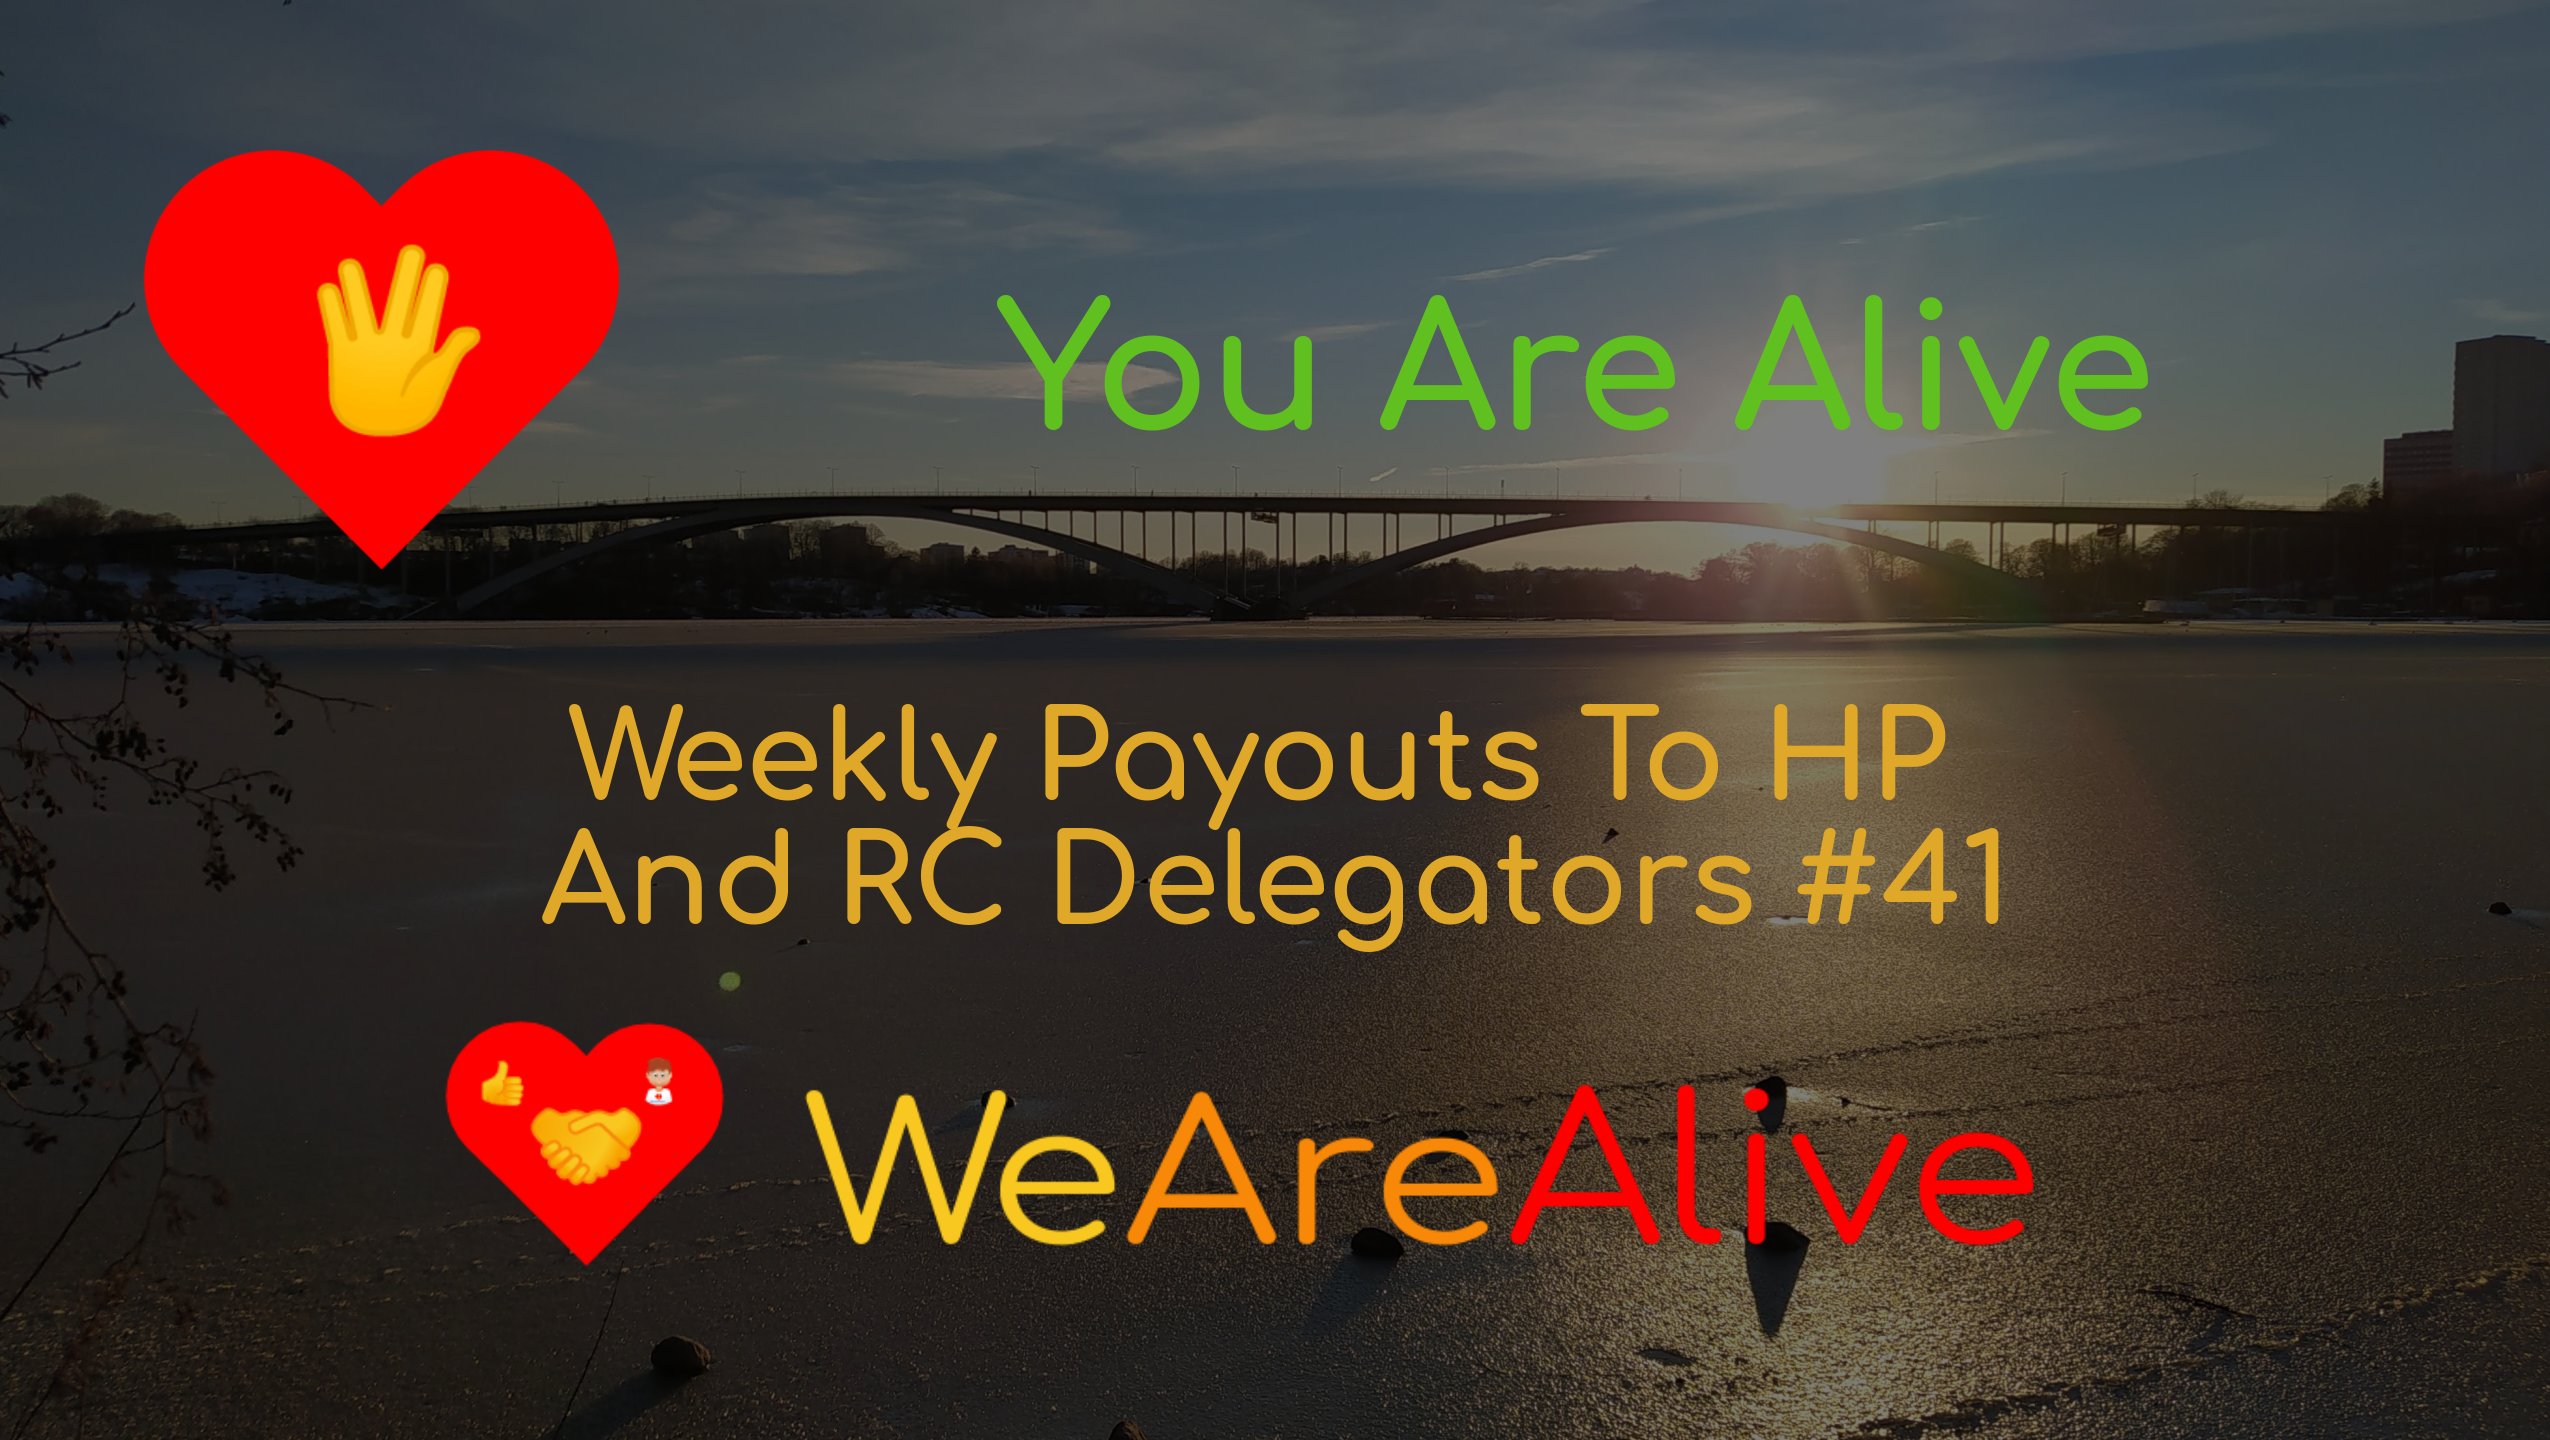 @youarealive/you-are-alive-weekly-payouts-to-hp-and-rc-delegators-41